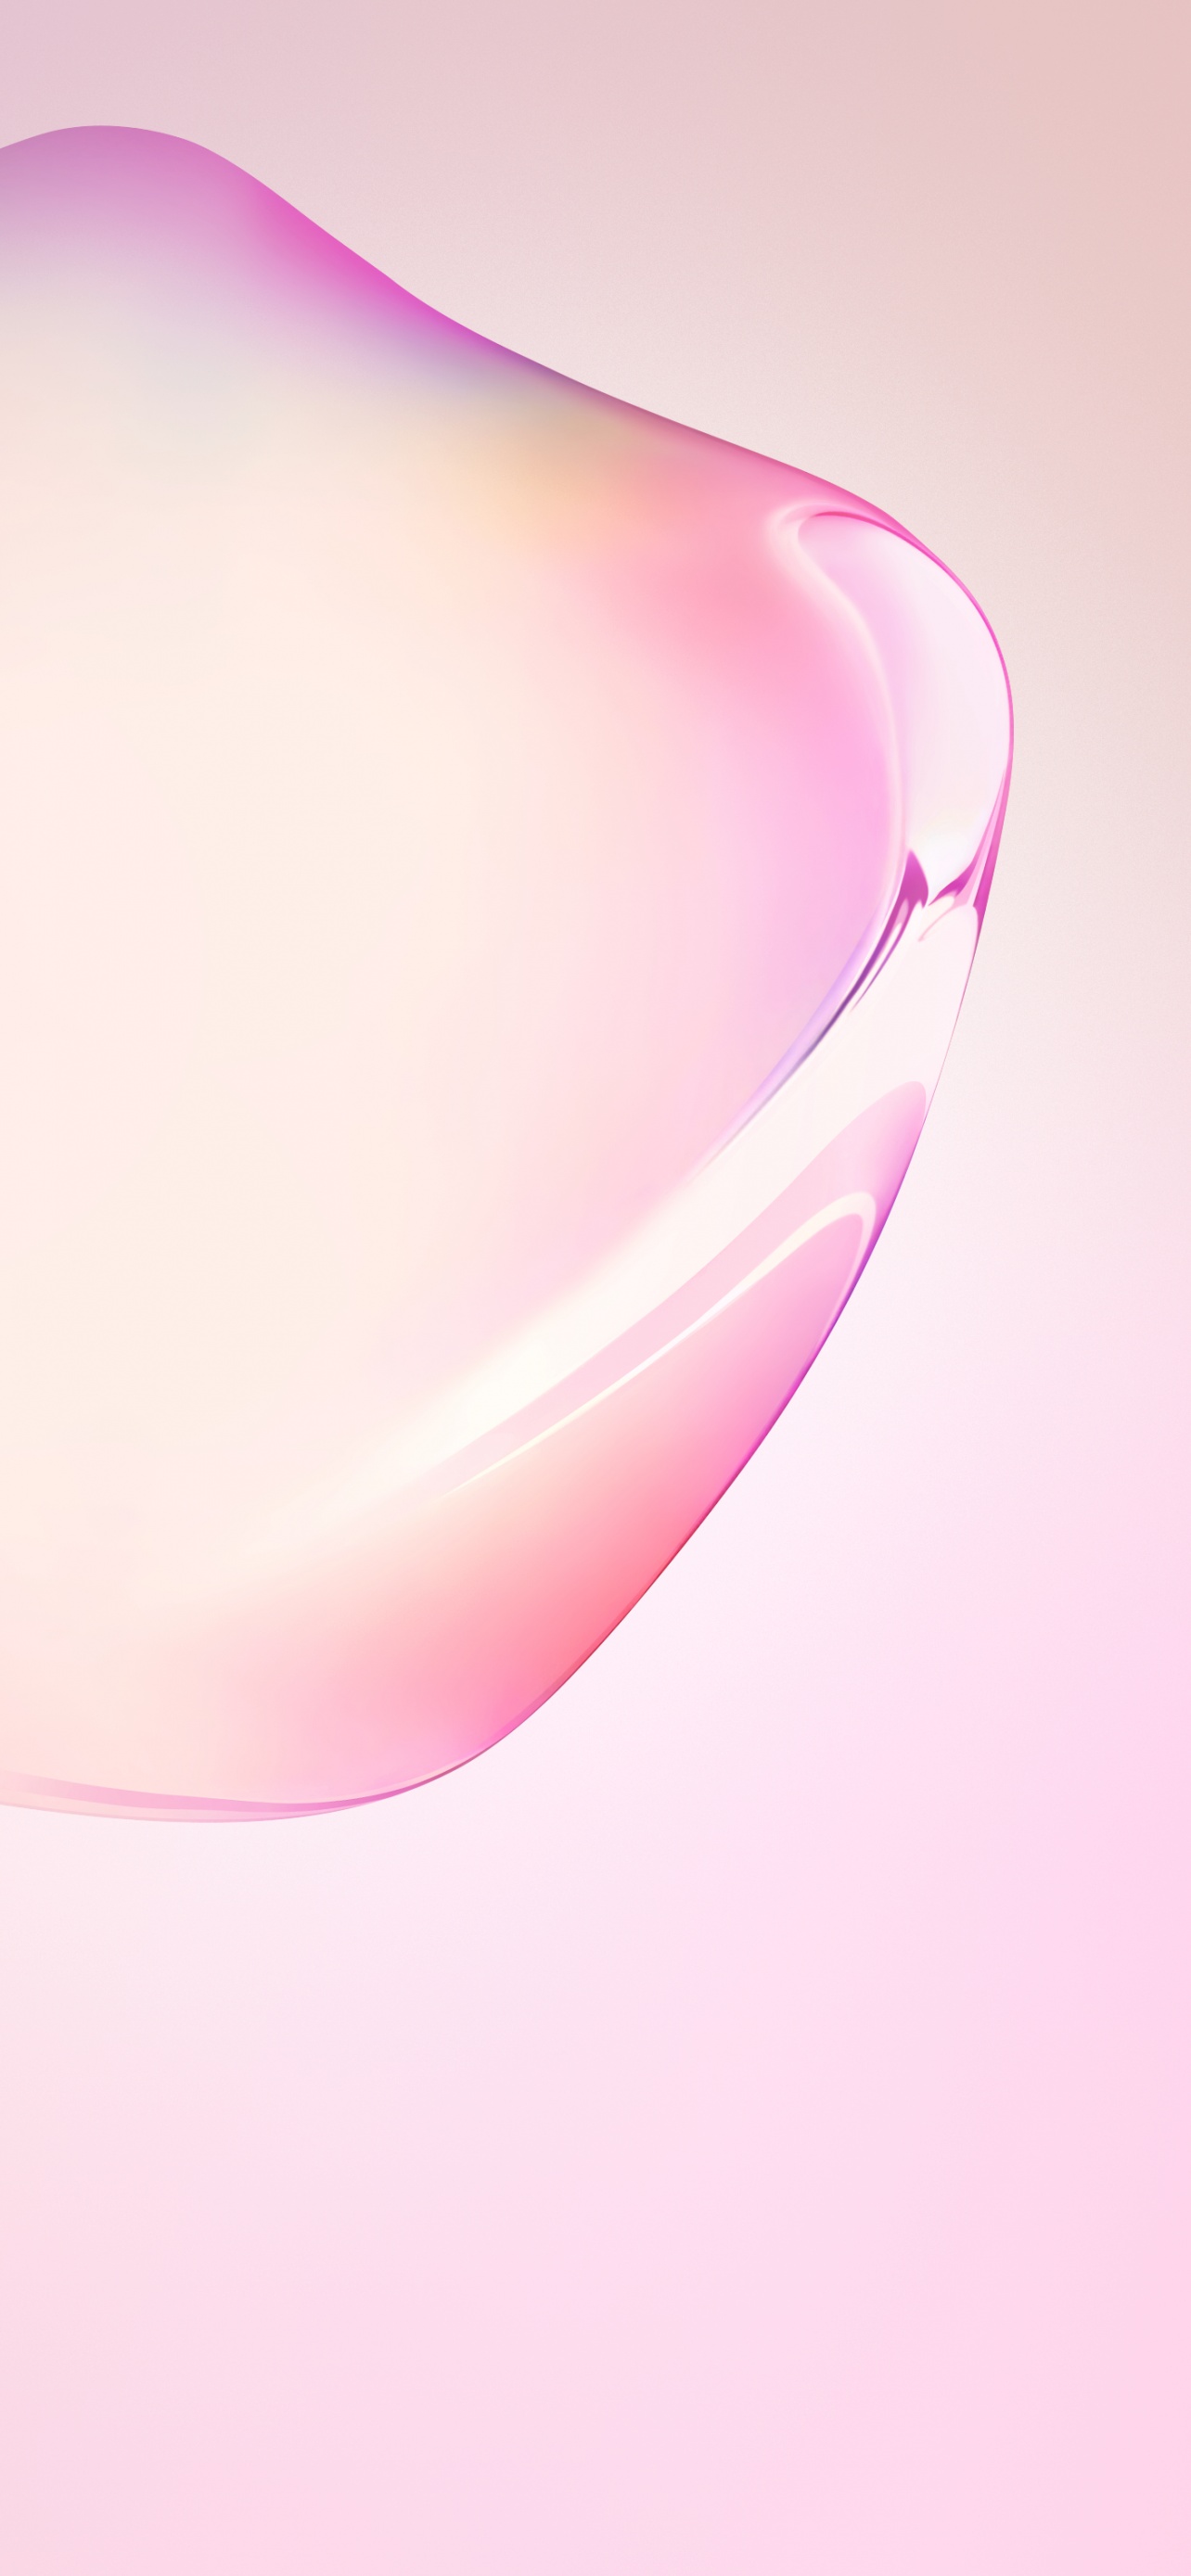 Samsung Galaxy Note10 Wallpaper 4K, Bubble, Pink, Stock, Abstract